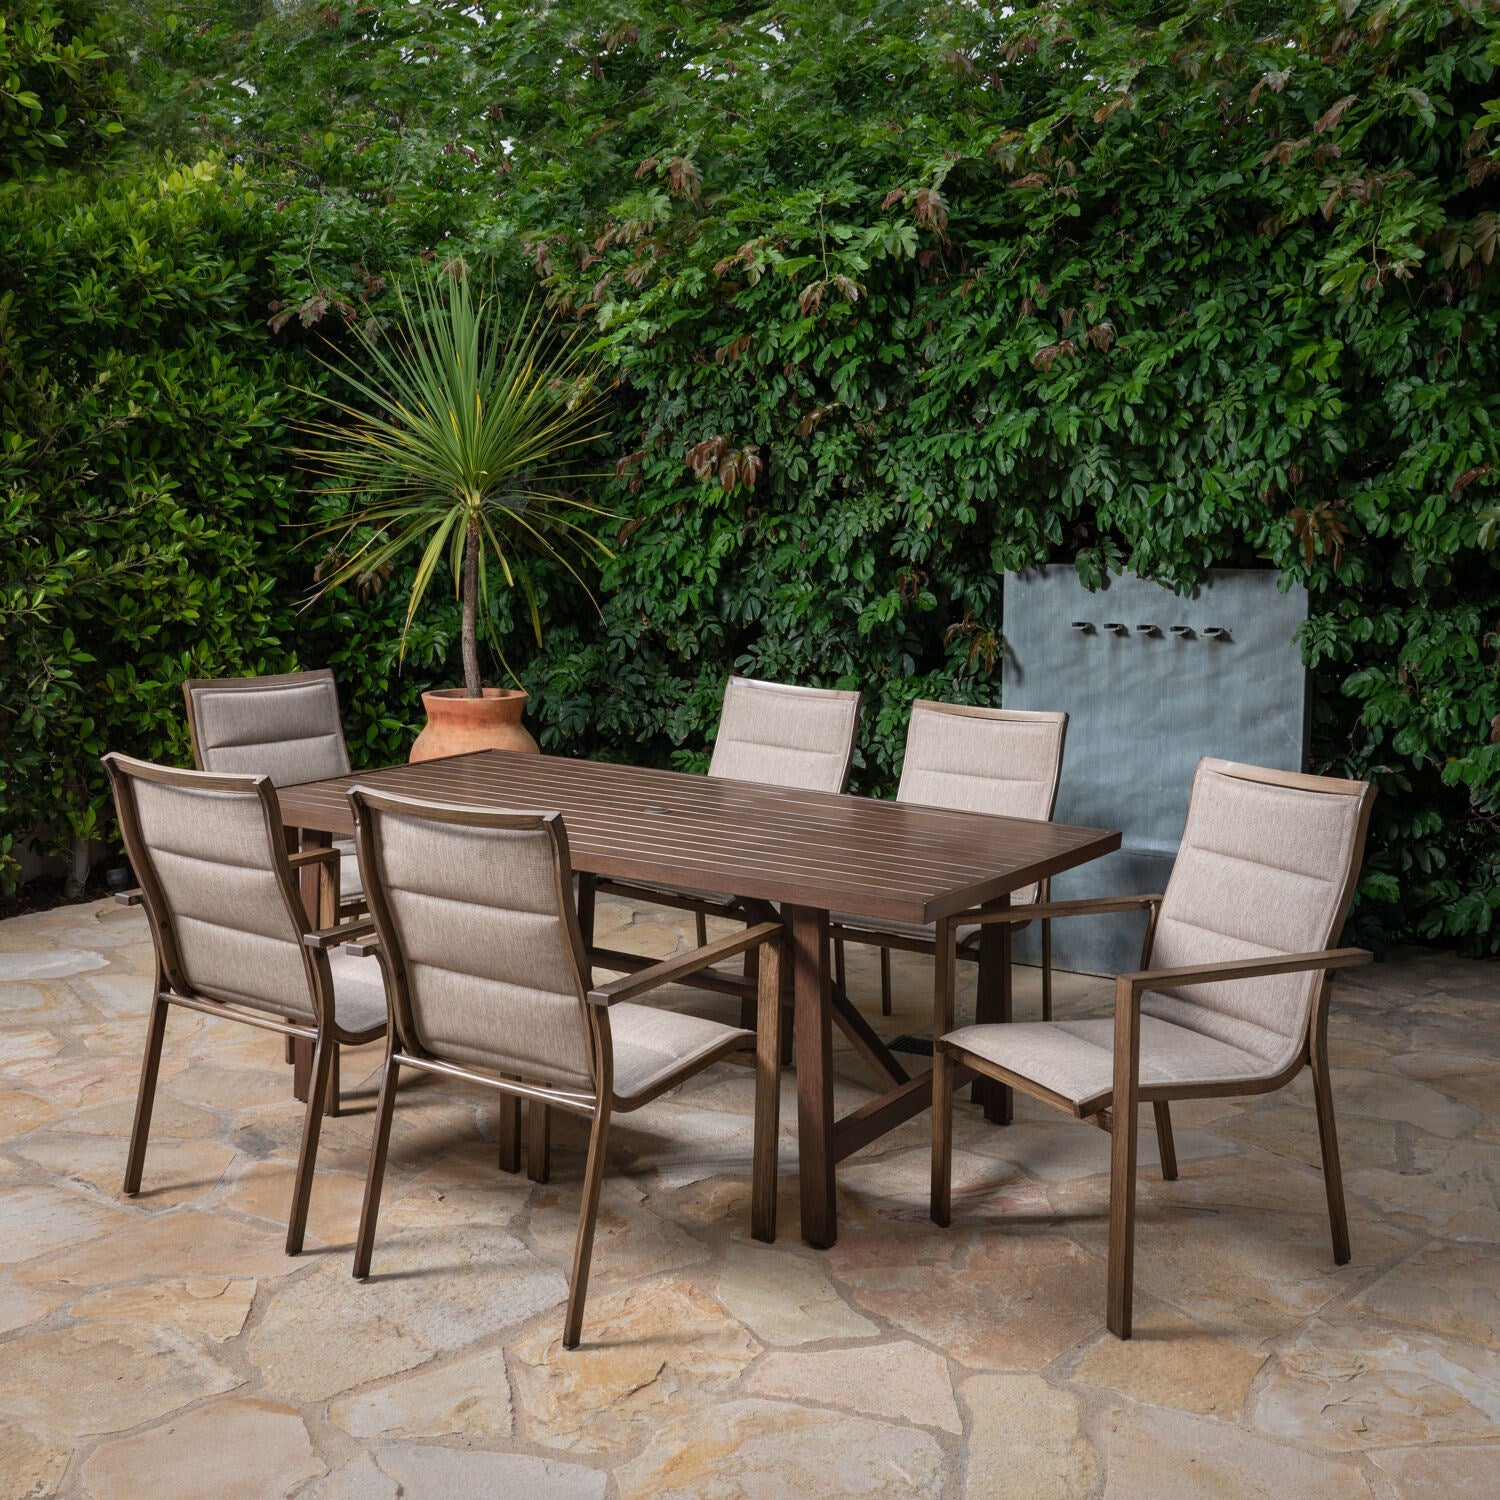 Fairhope 7-Piece Outdoor Dining Set with 6 Padded Contoured-Sling Chairs and a 74-In. x 40-In. Trestle Table, Tan